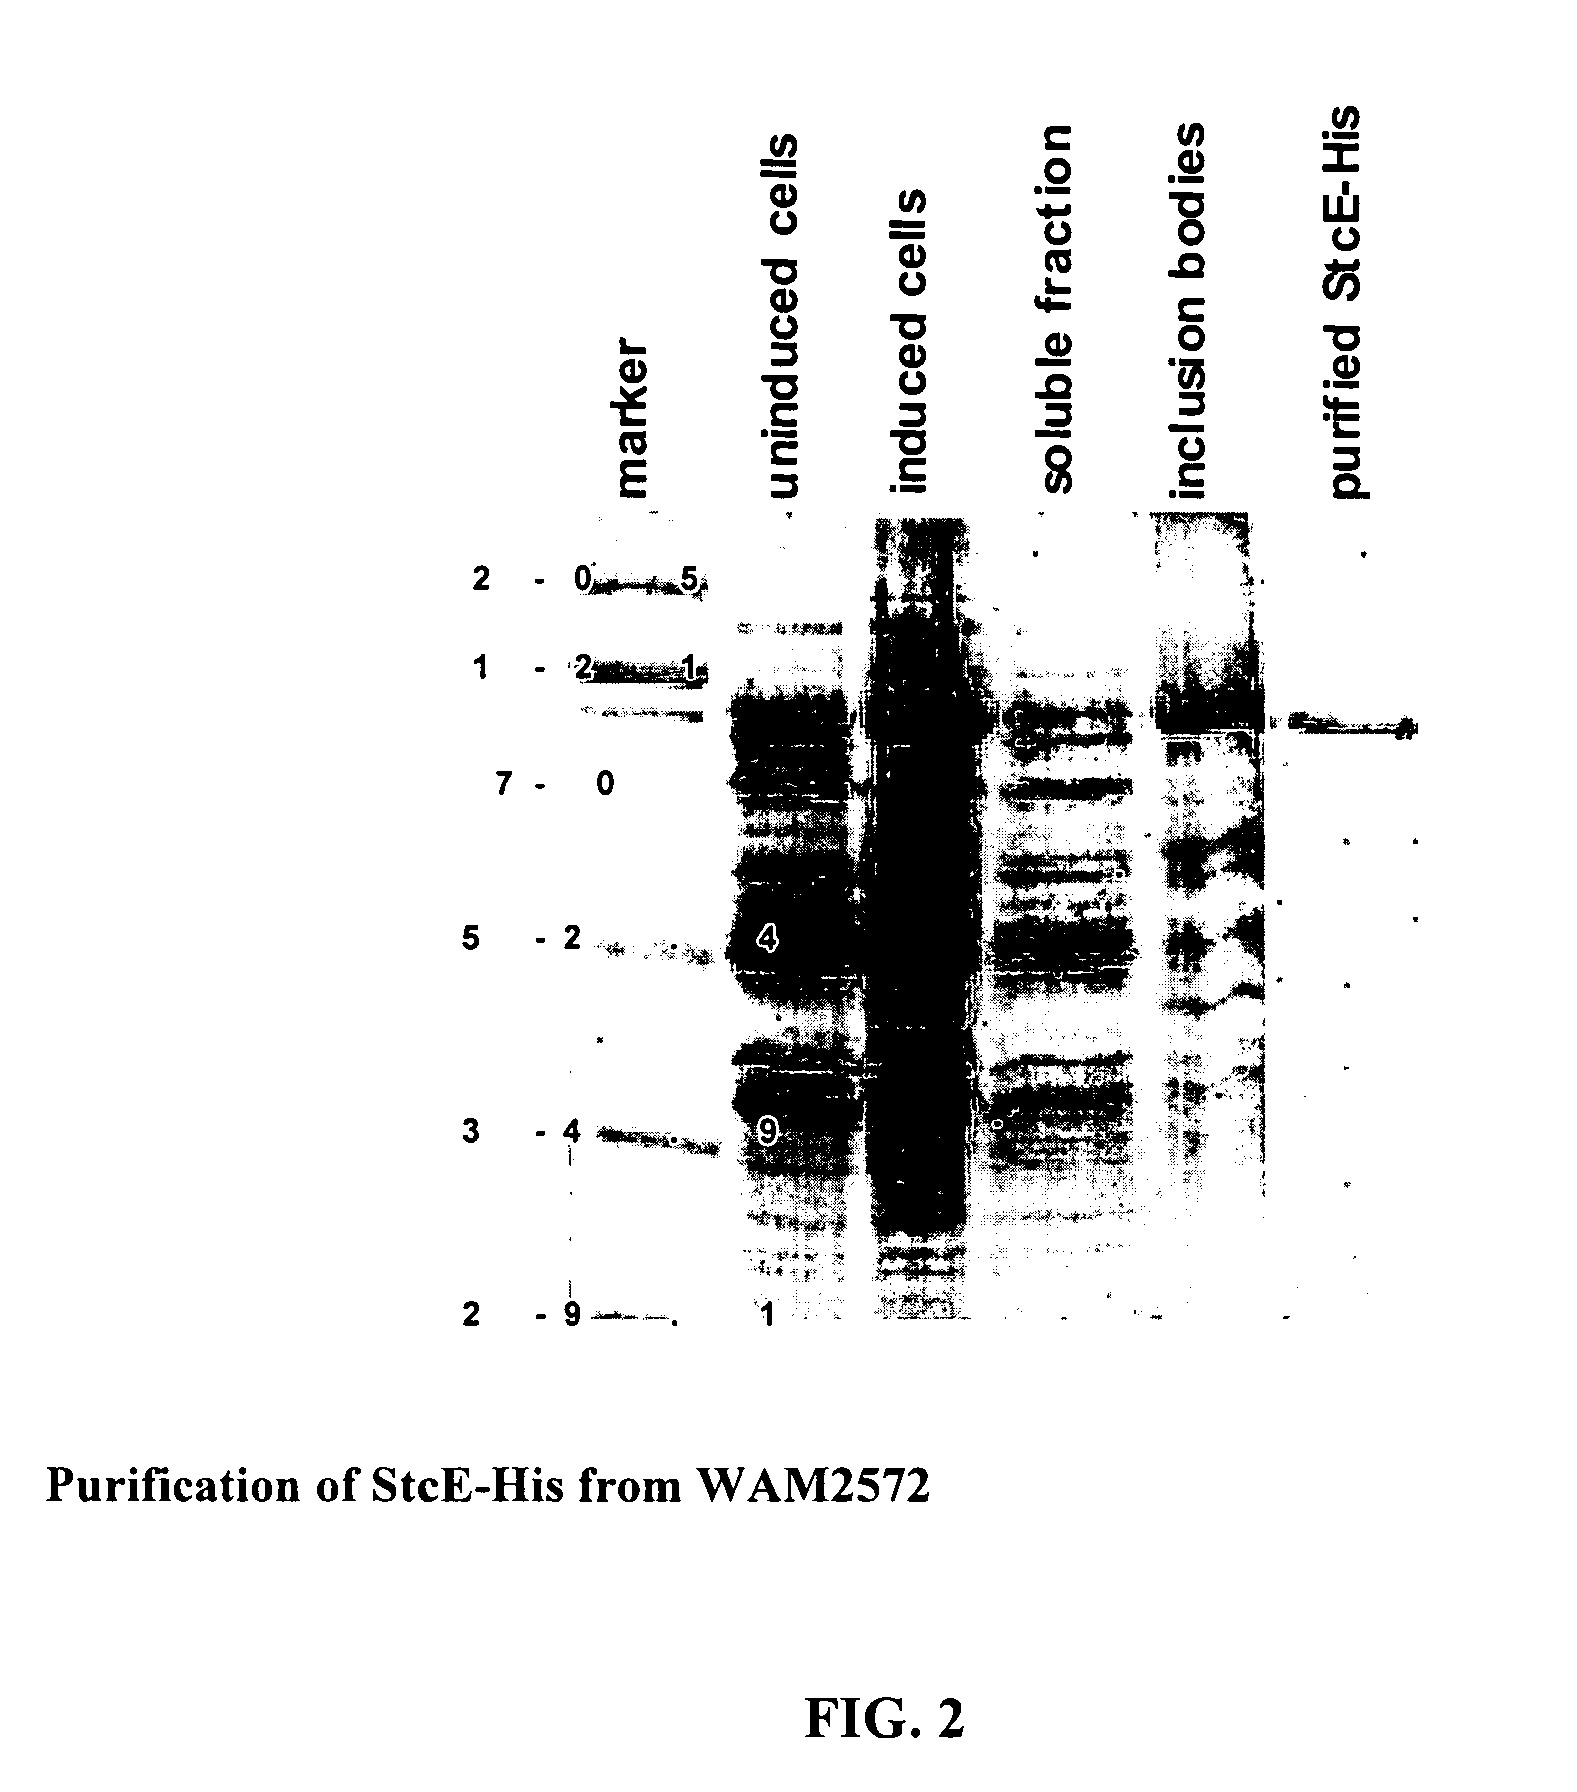 Method of reducing complement - mediated disruption of cells